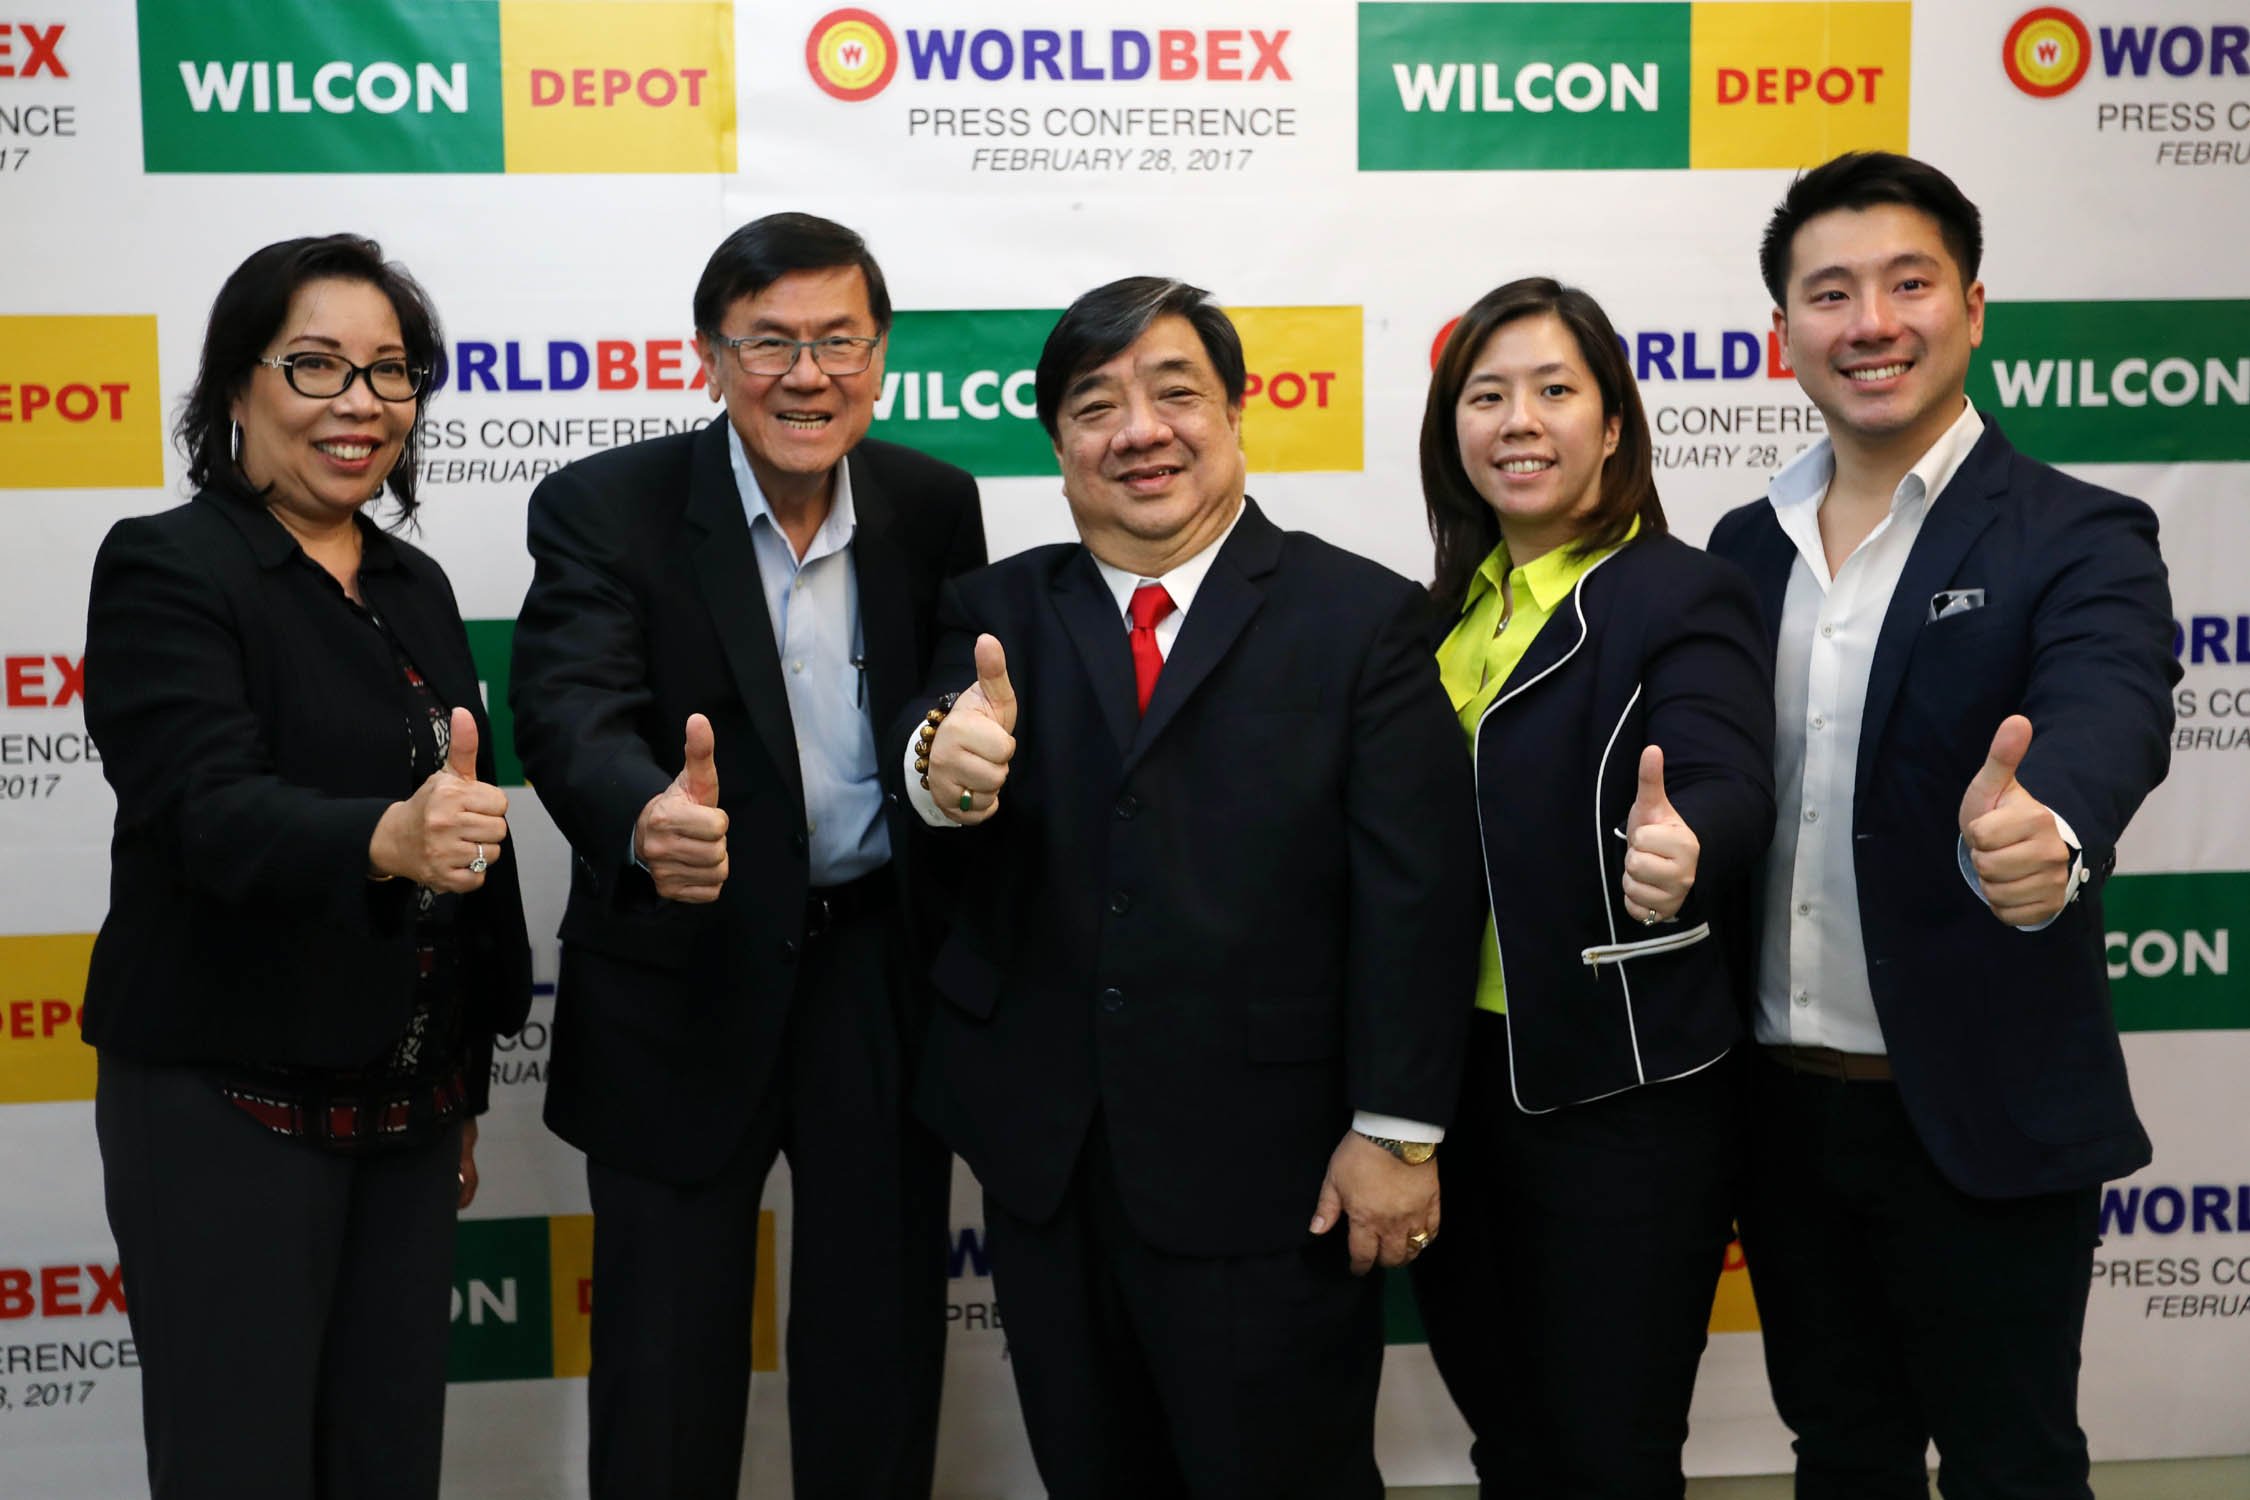 Wilcon Depot and Worldbex renew another year of partnership